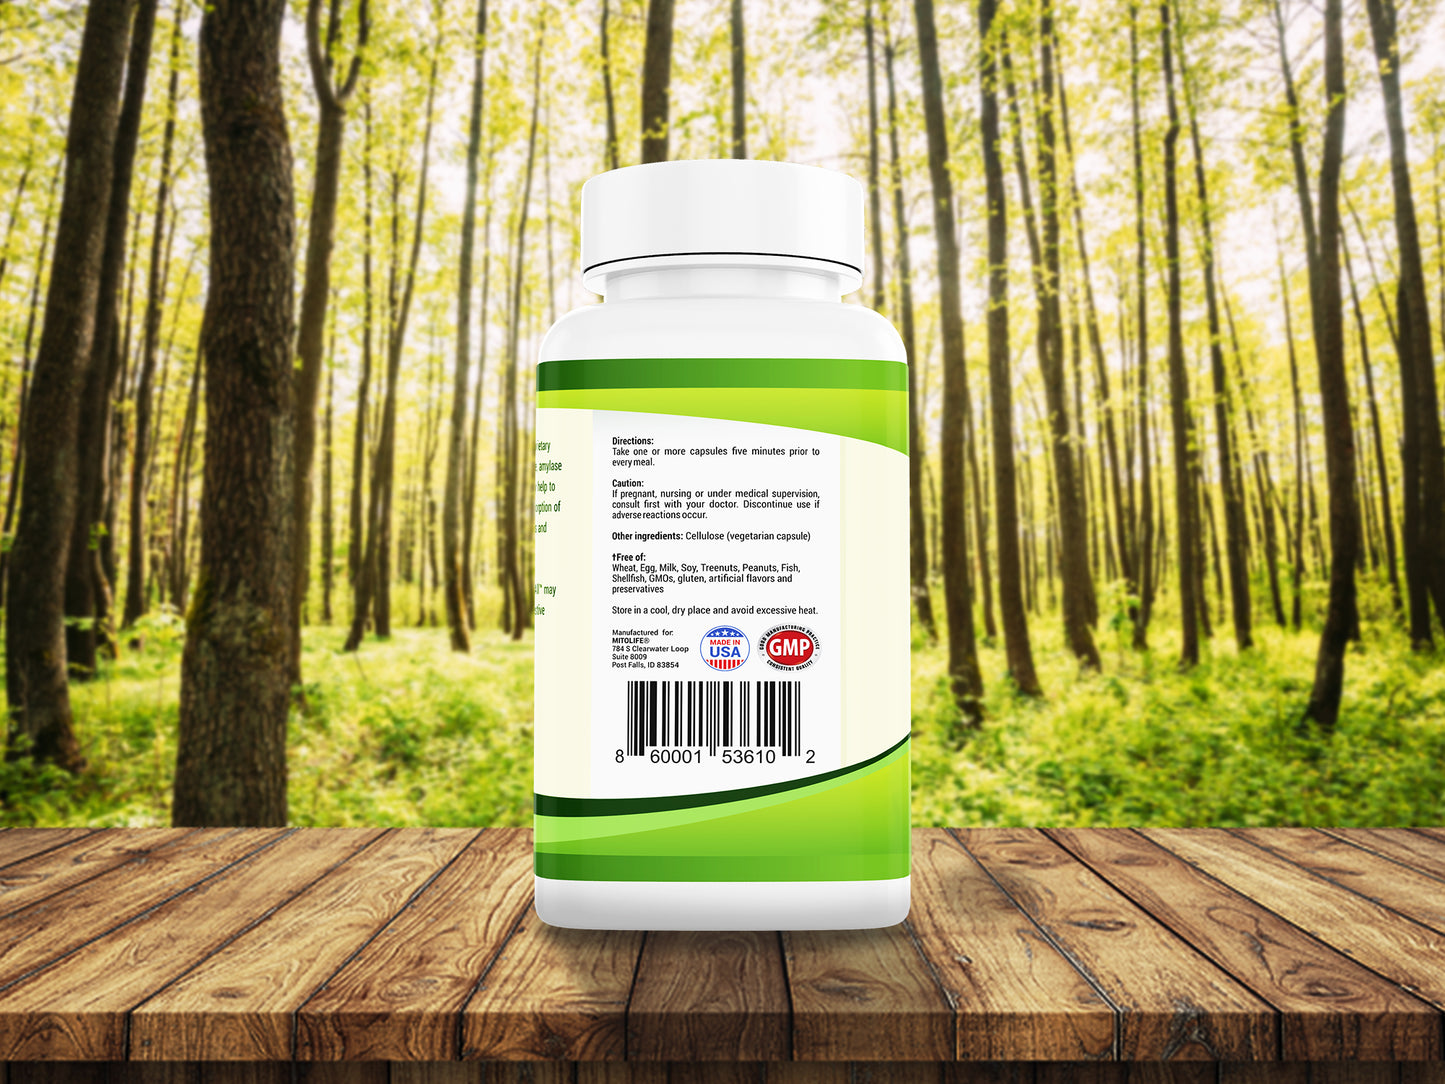 DIGEST-IT-ALL (DIGESTIVE ENZYMES)